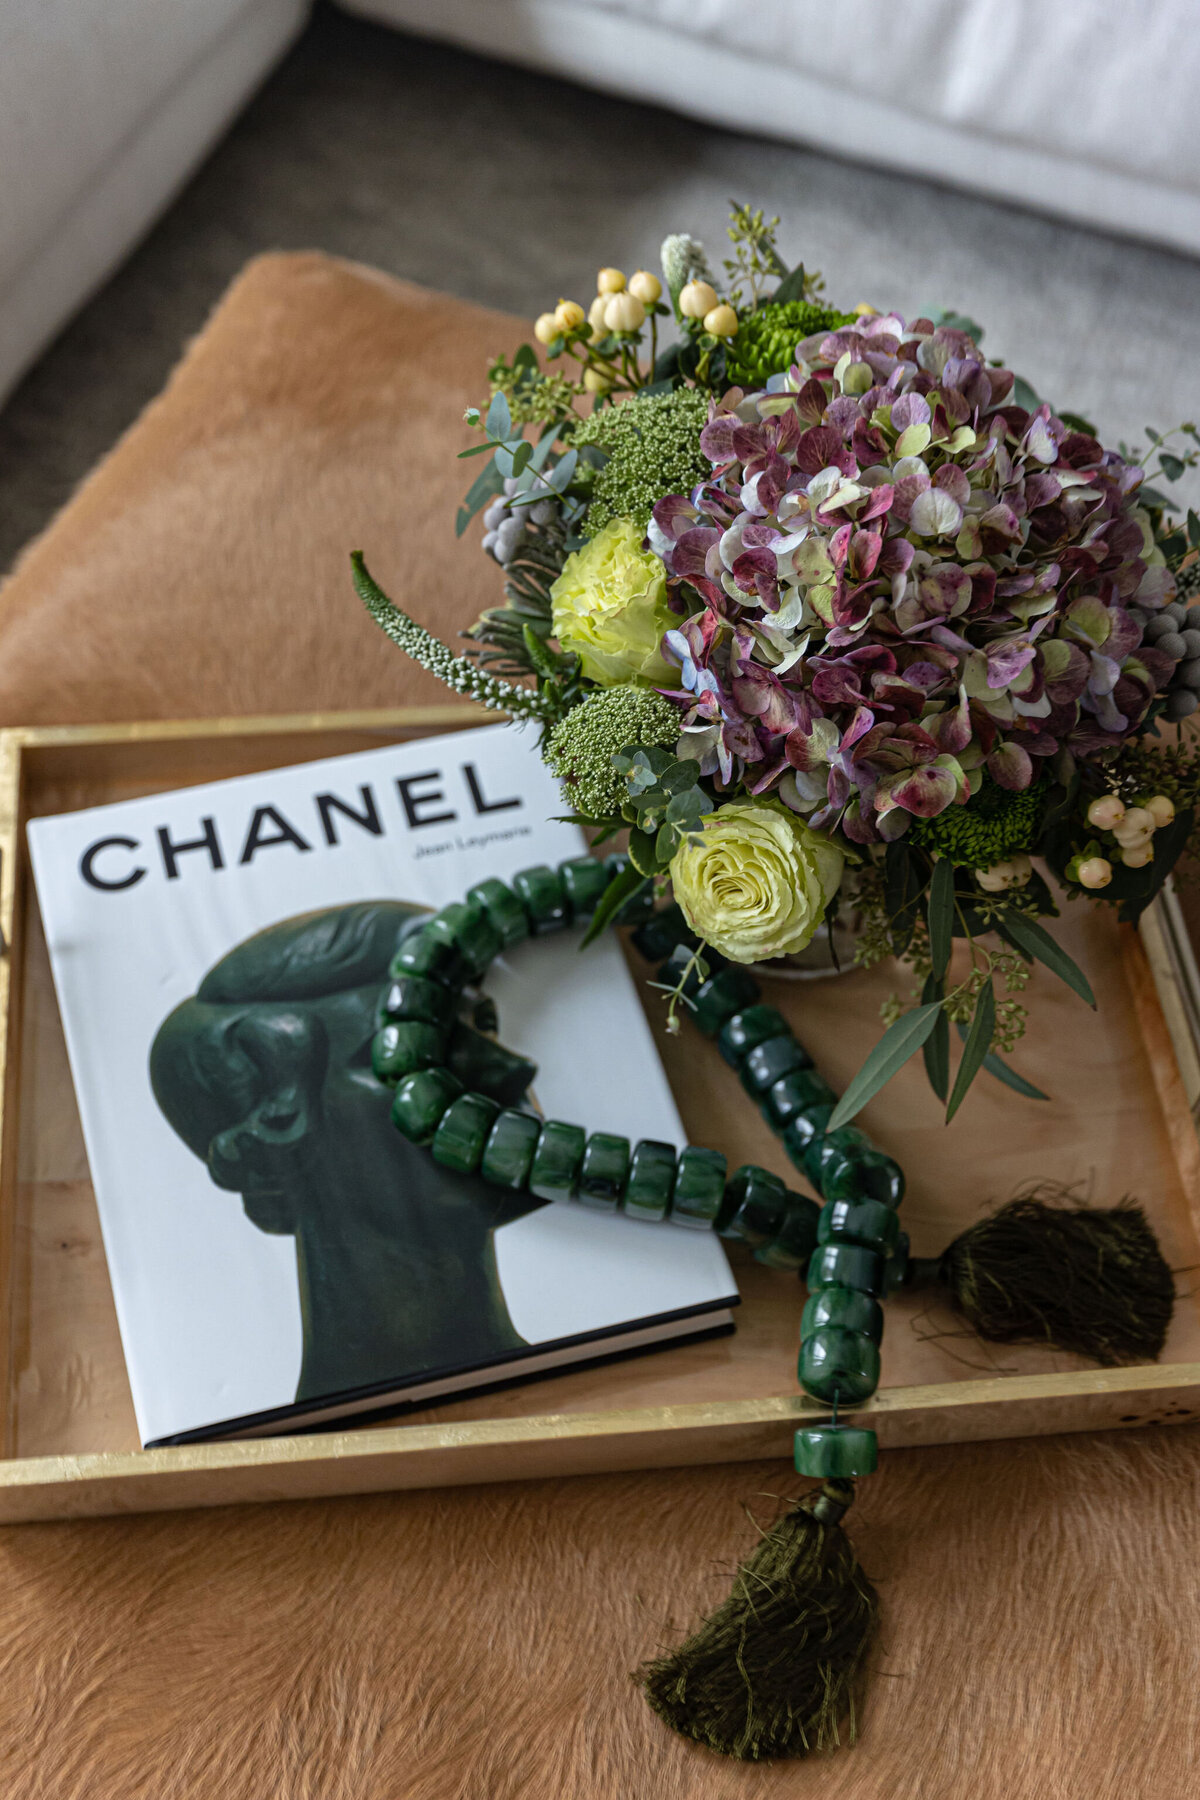 flowers, a book, and jewelry on a serving tray